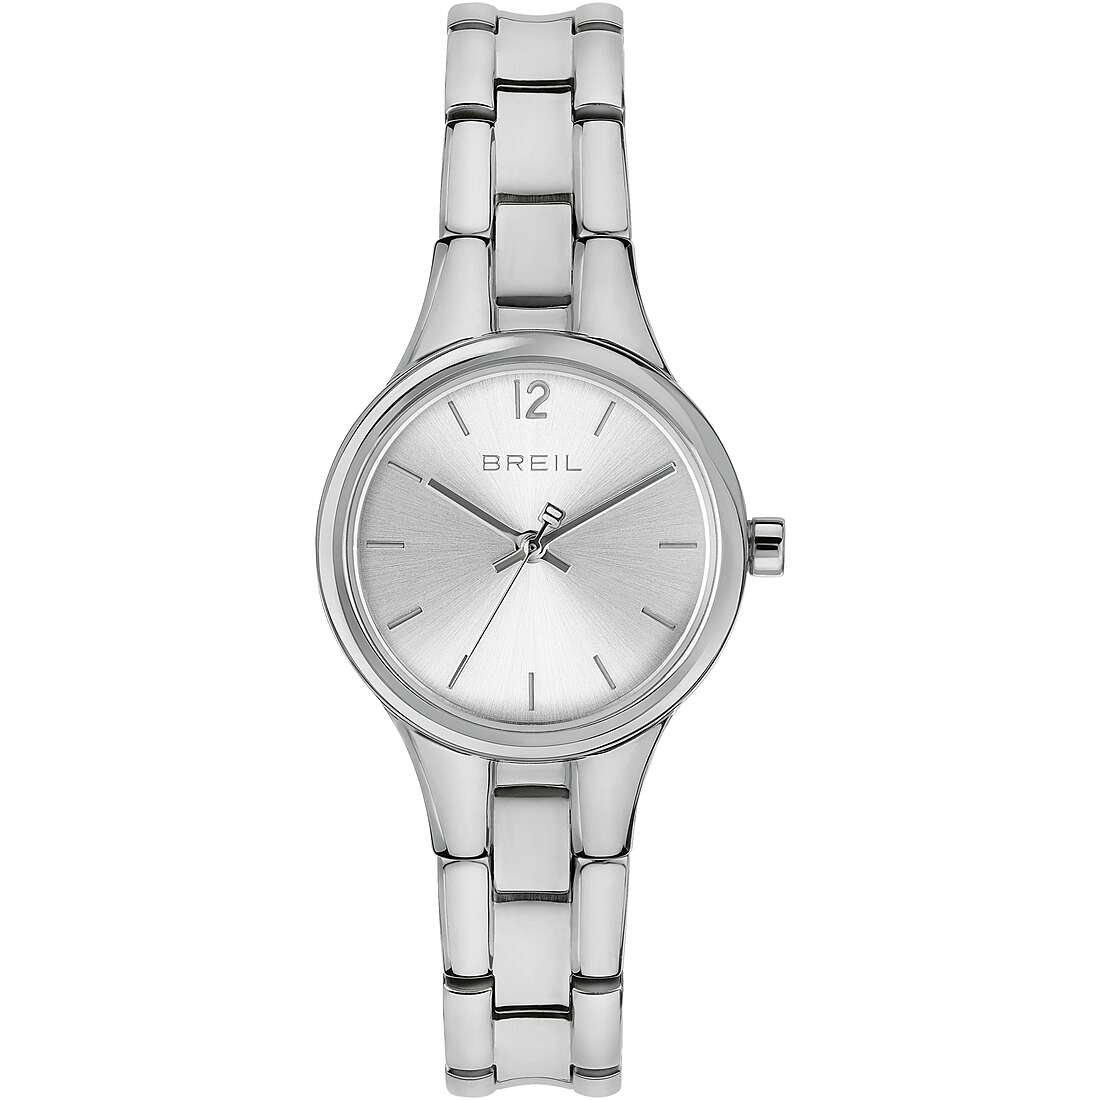 only time watch Steel White dial woman TW1991